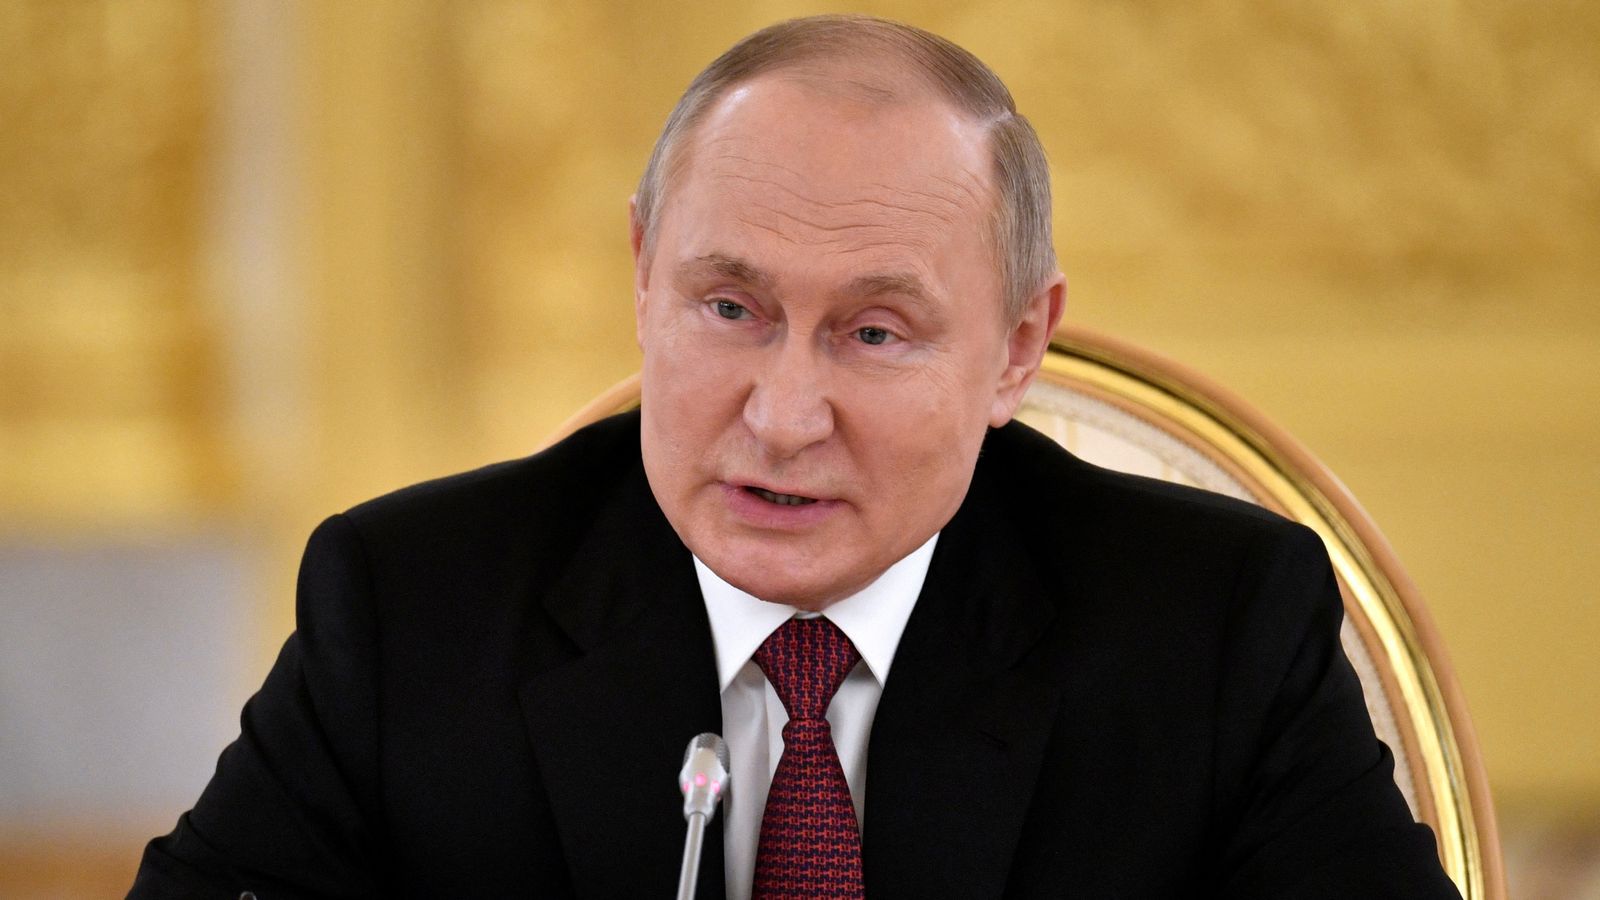 Putin warns Russia will respond if NATO boosts Finland and Sweden's military strength